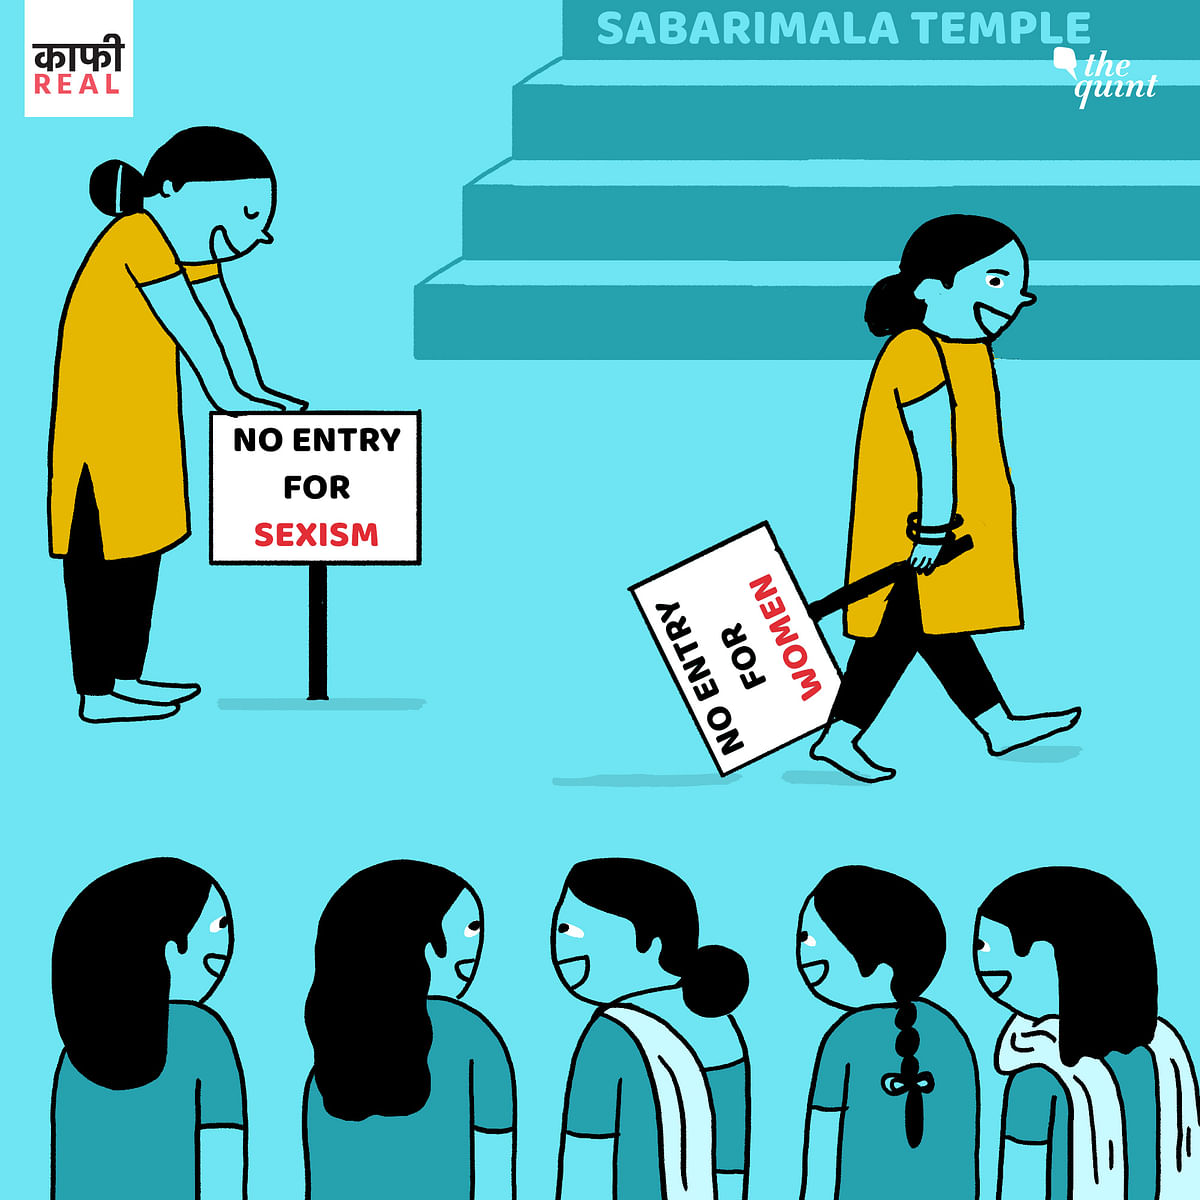 The ‘No Entry’ sign at Sabarimala stays. The Supreme Court just fixed the error.